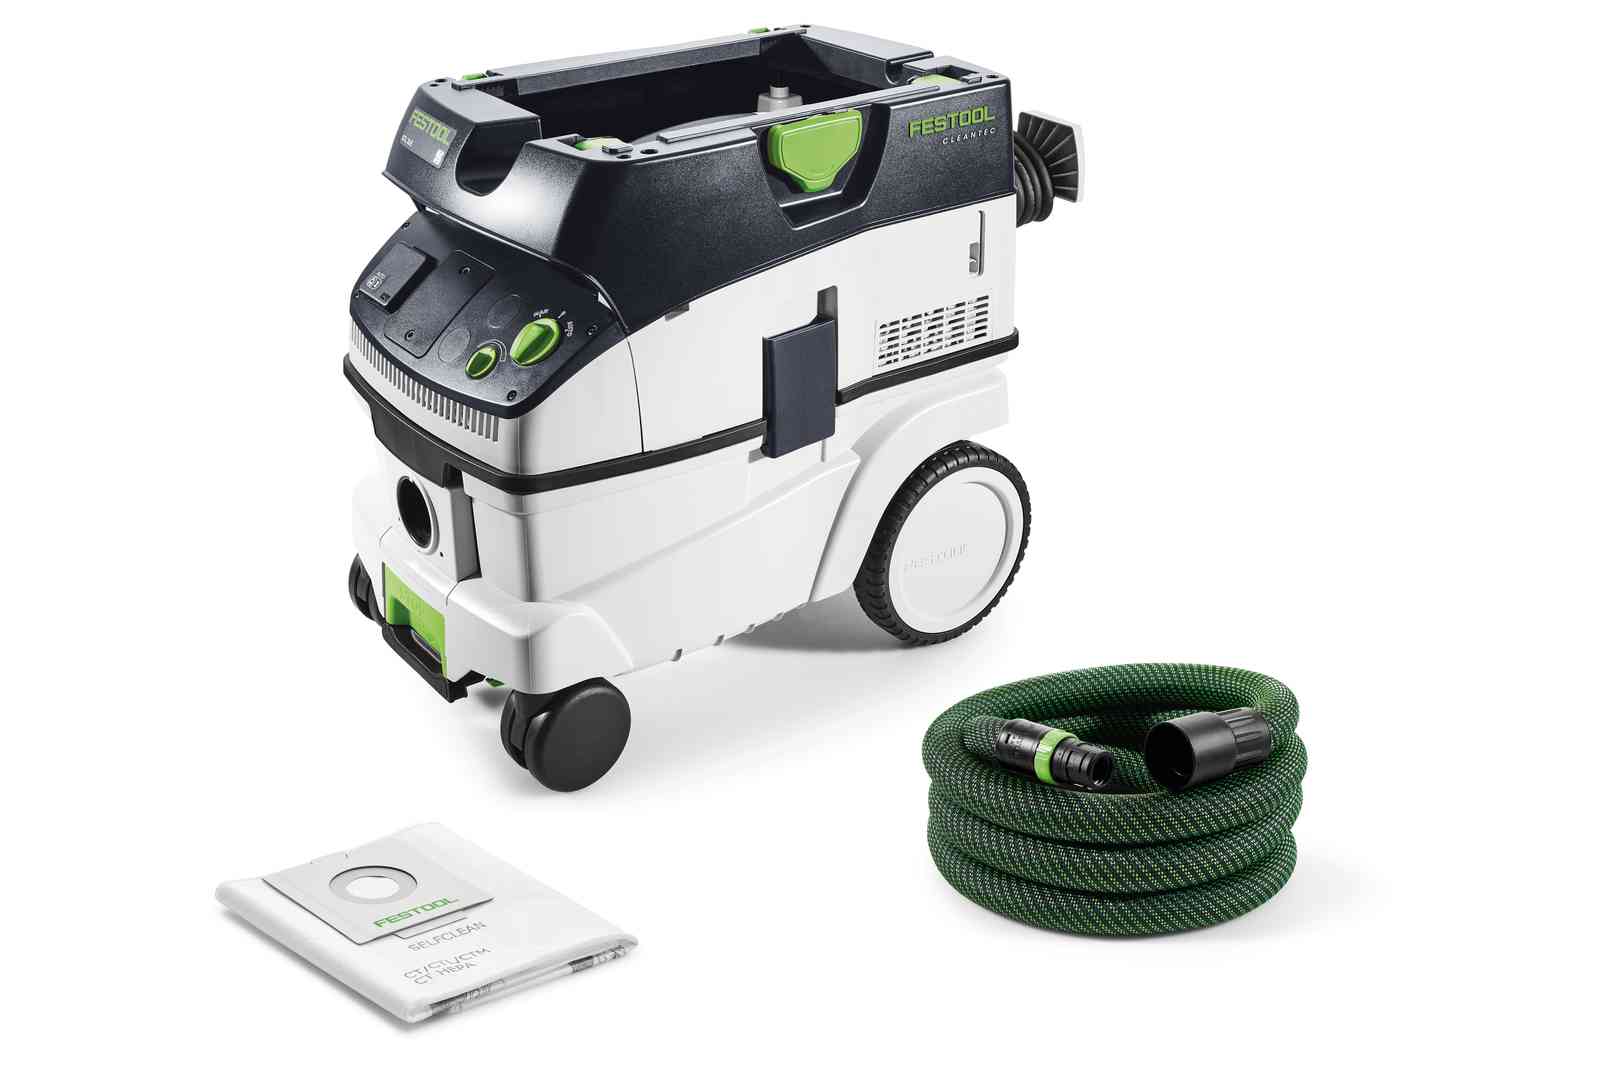 Festool CT 26 E Dust Extractor - $639.20 - Reconditioned